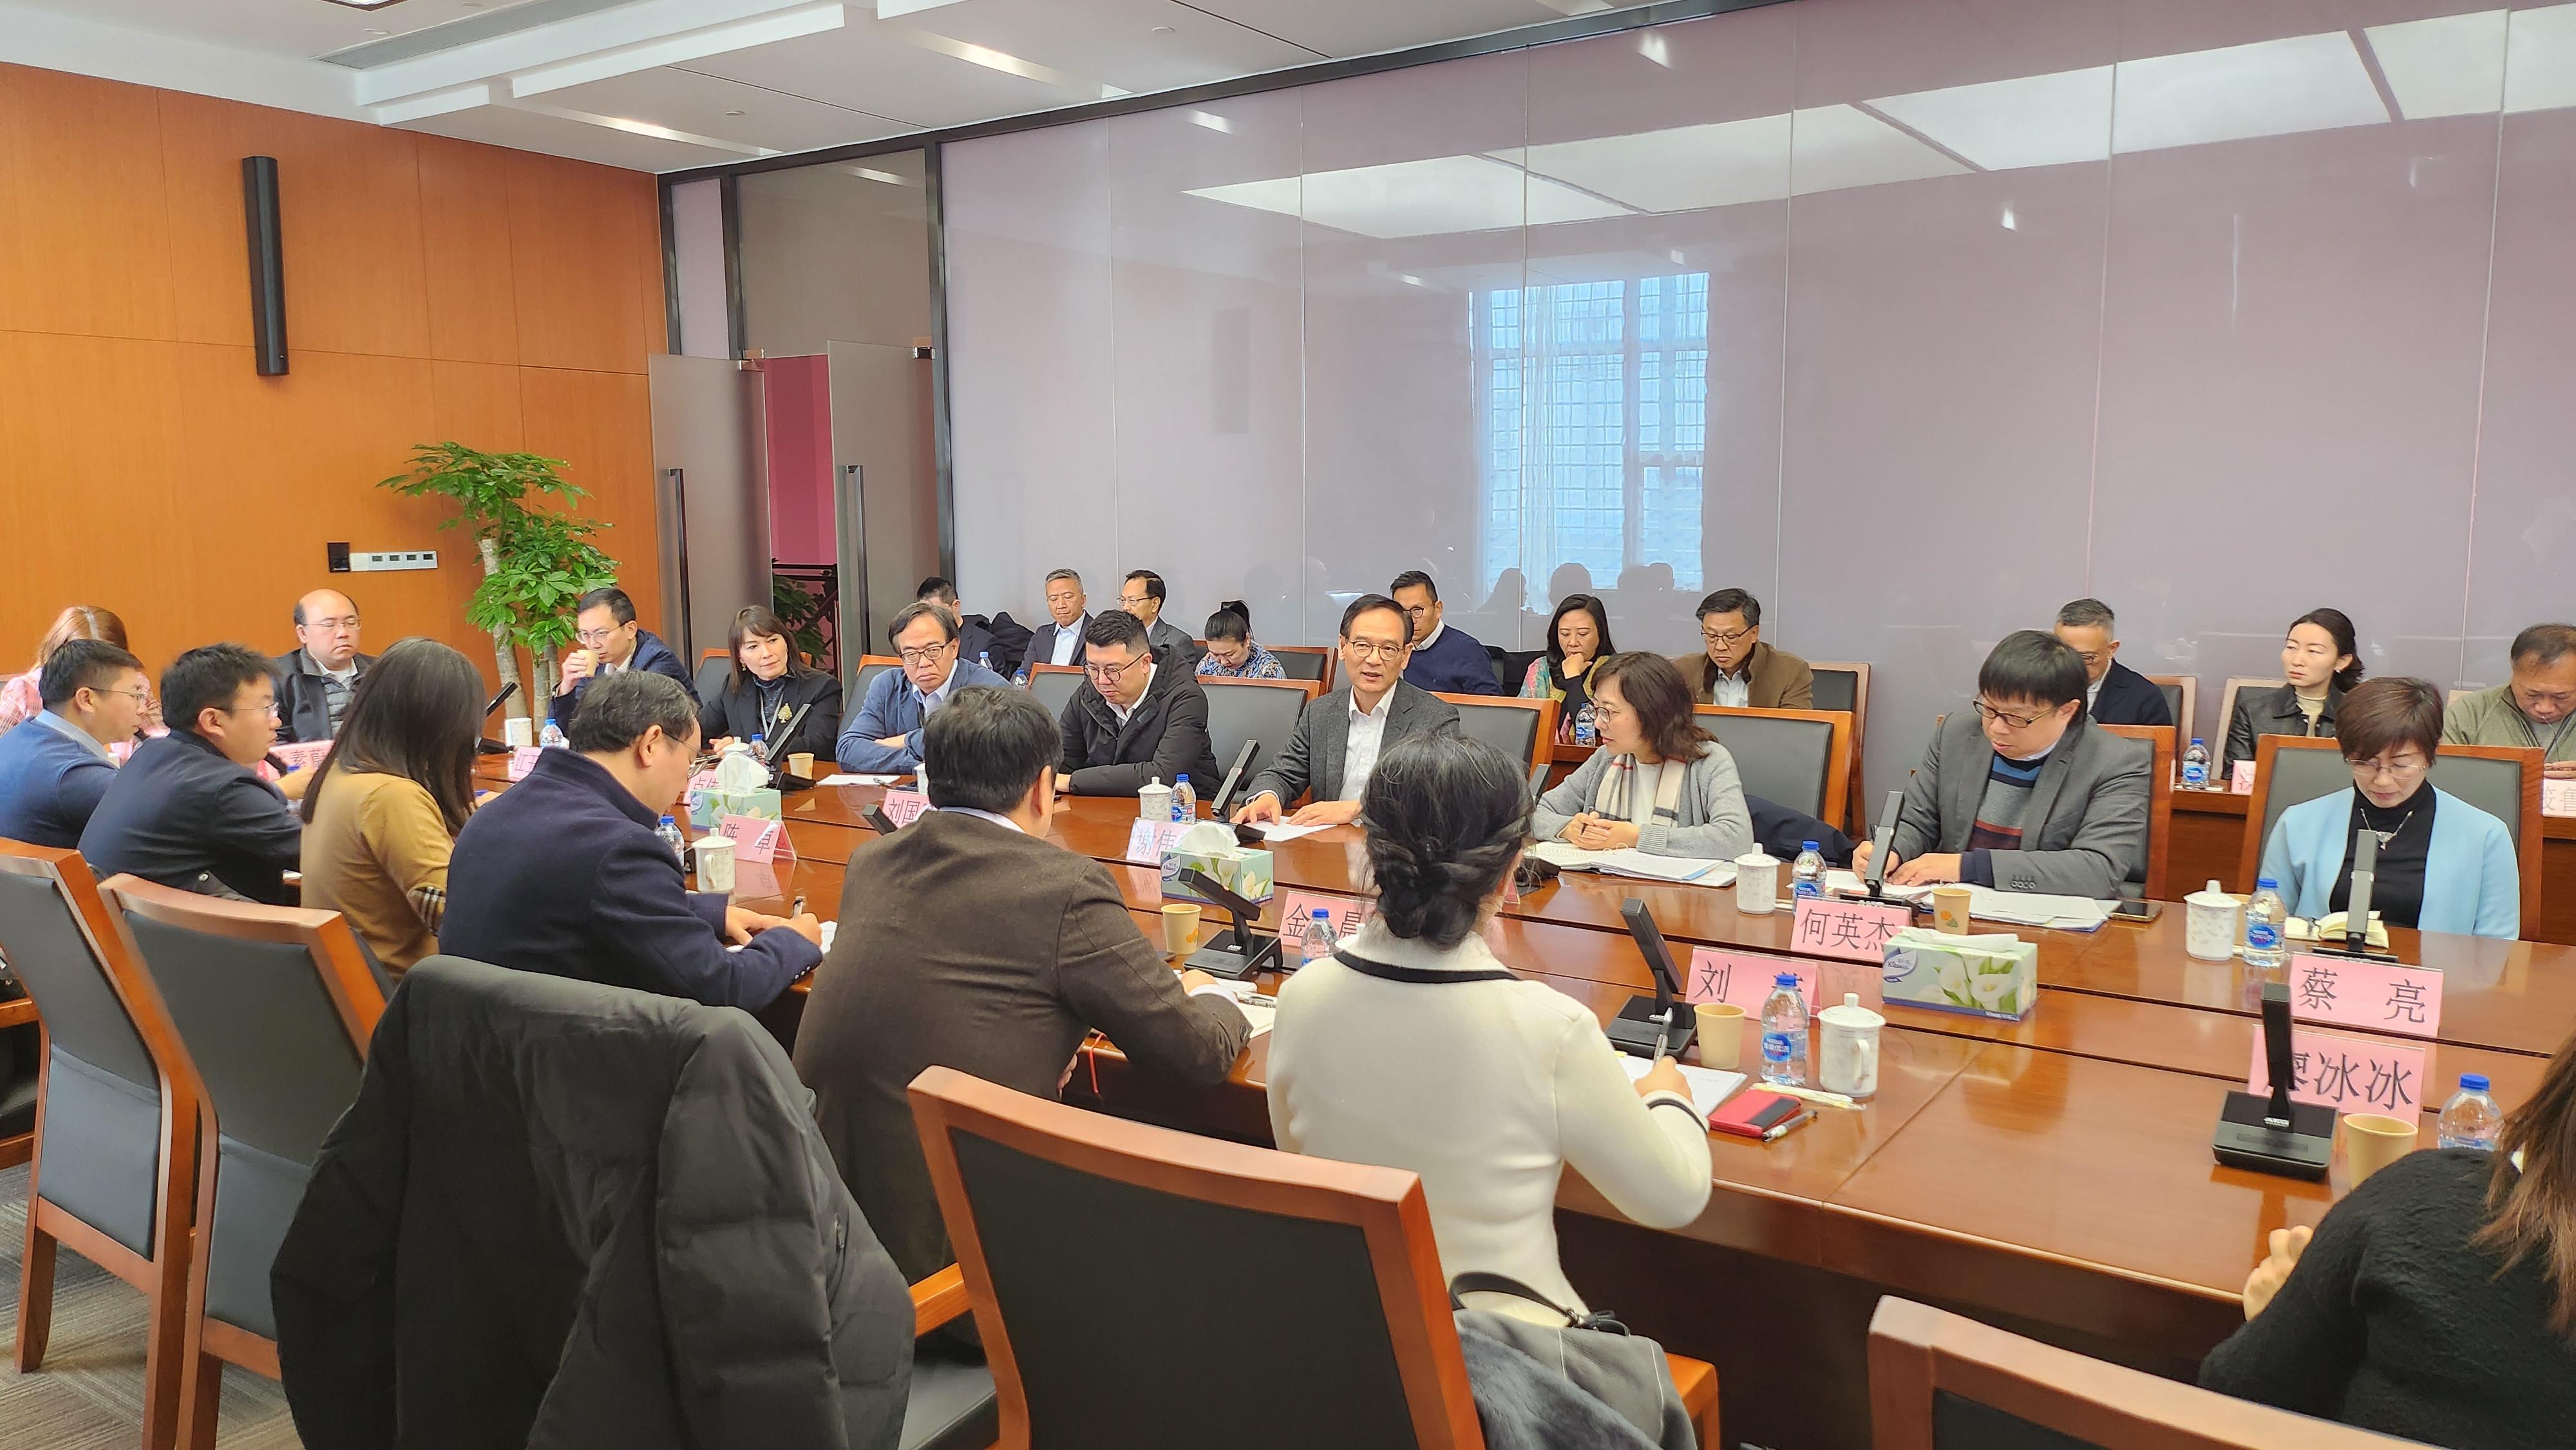 The delegation of the Legislative Council Panel on Development continues its study visit to Shanghai today (December 20). Photos shows the delegation exchanging views with the Shanghai Municipal Commission of Housing and Urban-Rural Development.